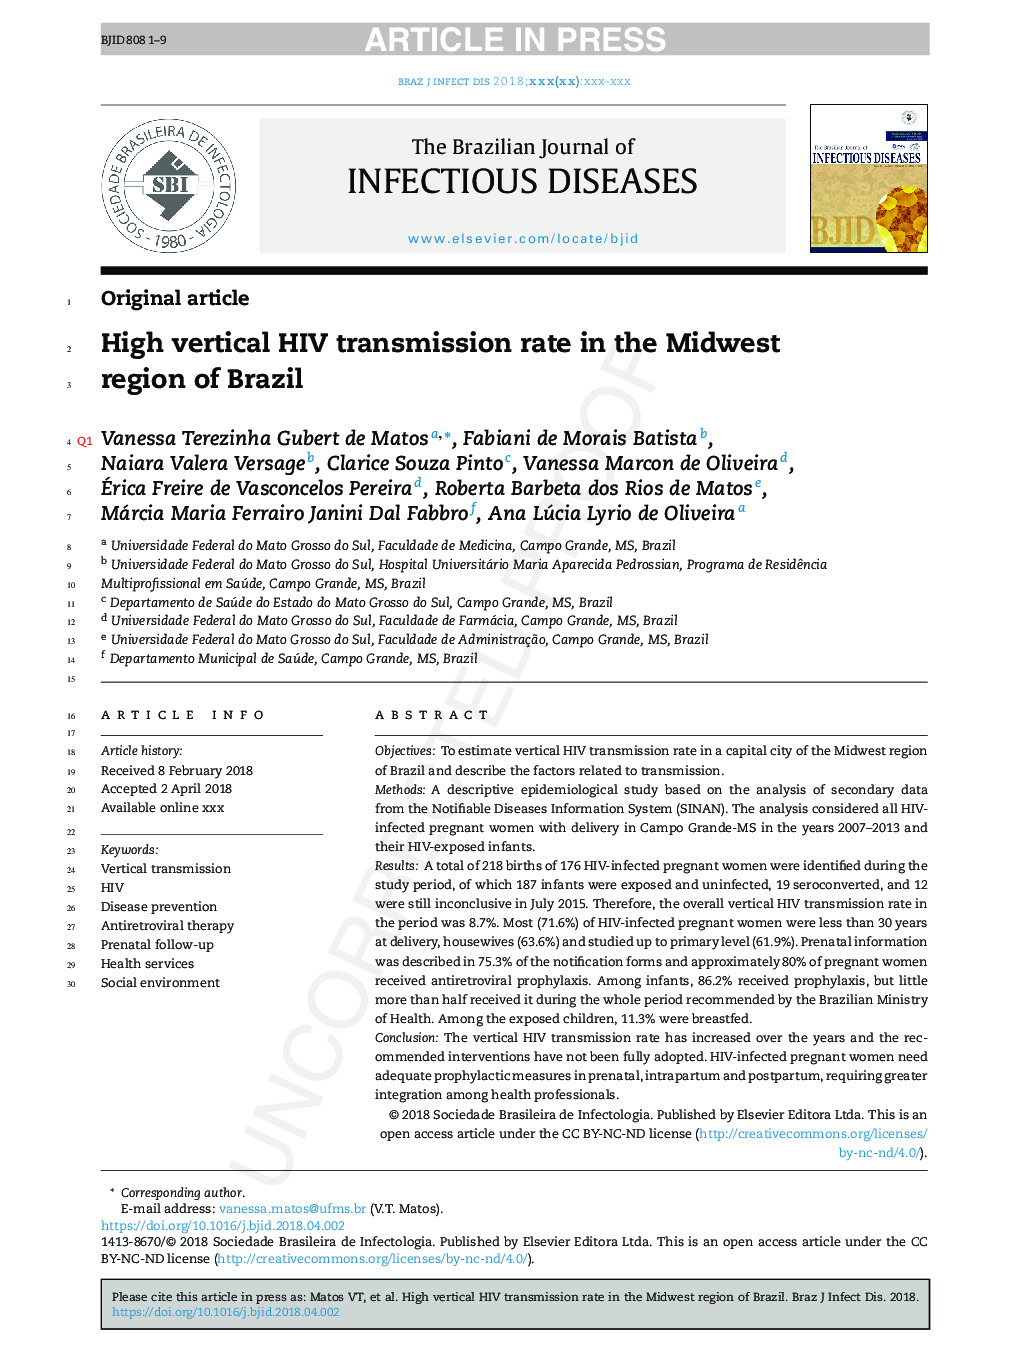 High vertical HIV transmission rate in the Midwest region of Brazil